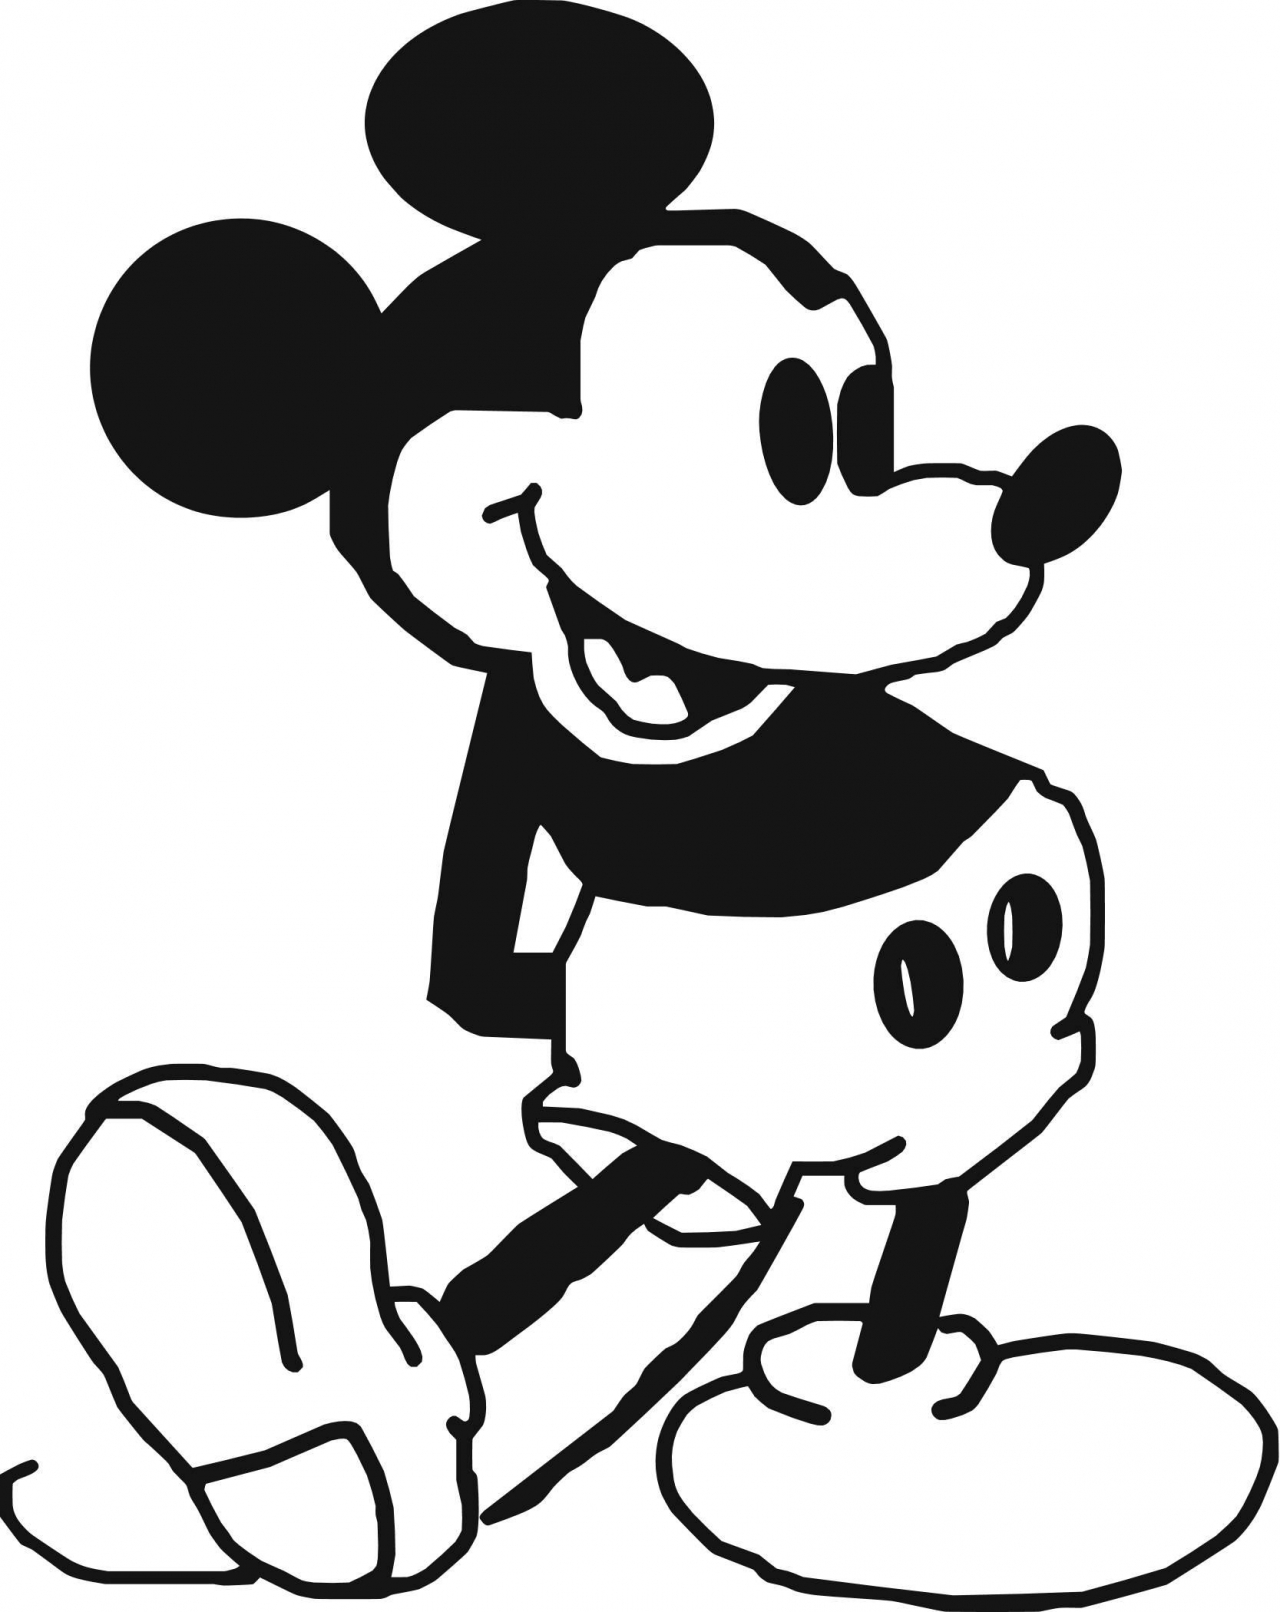 Free Goofy Clipart Black And White, Download Free Clip Art.